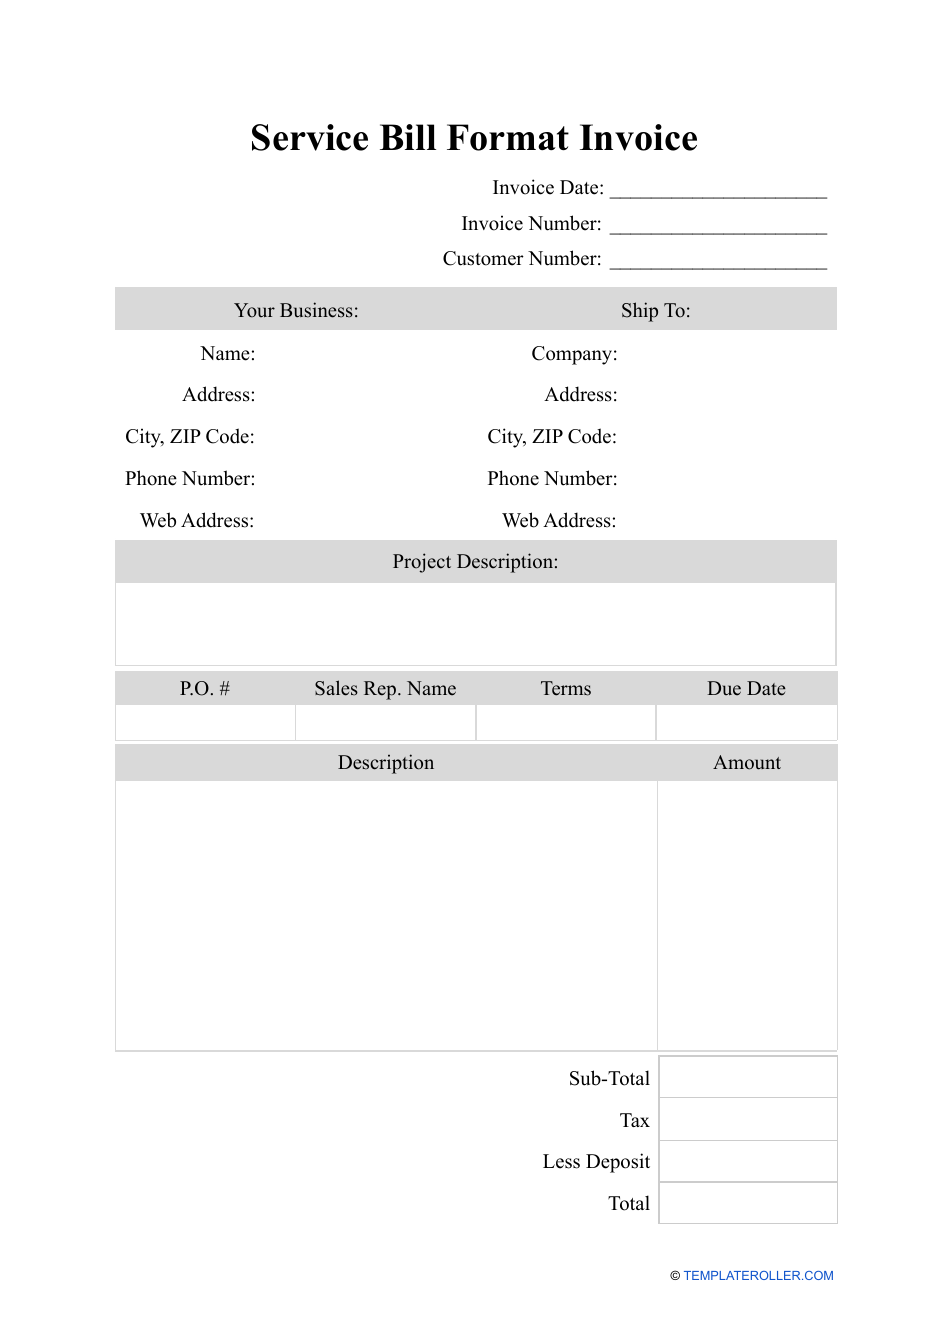 Service Bill Format Invoice Template, Page 1